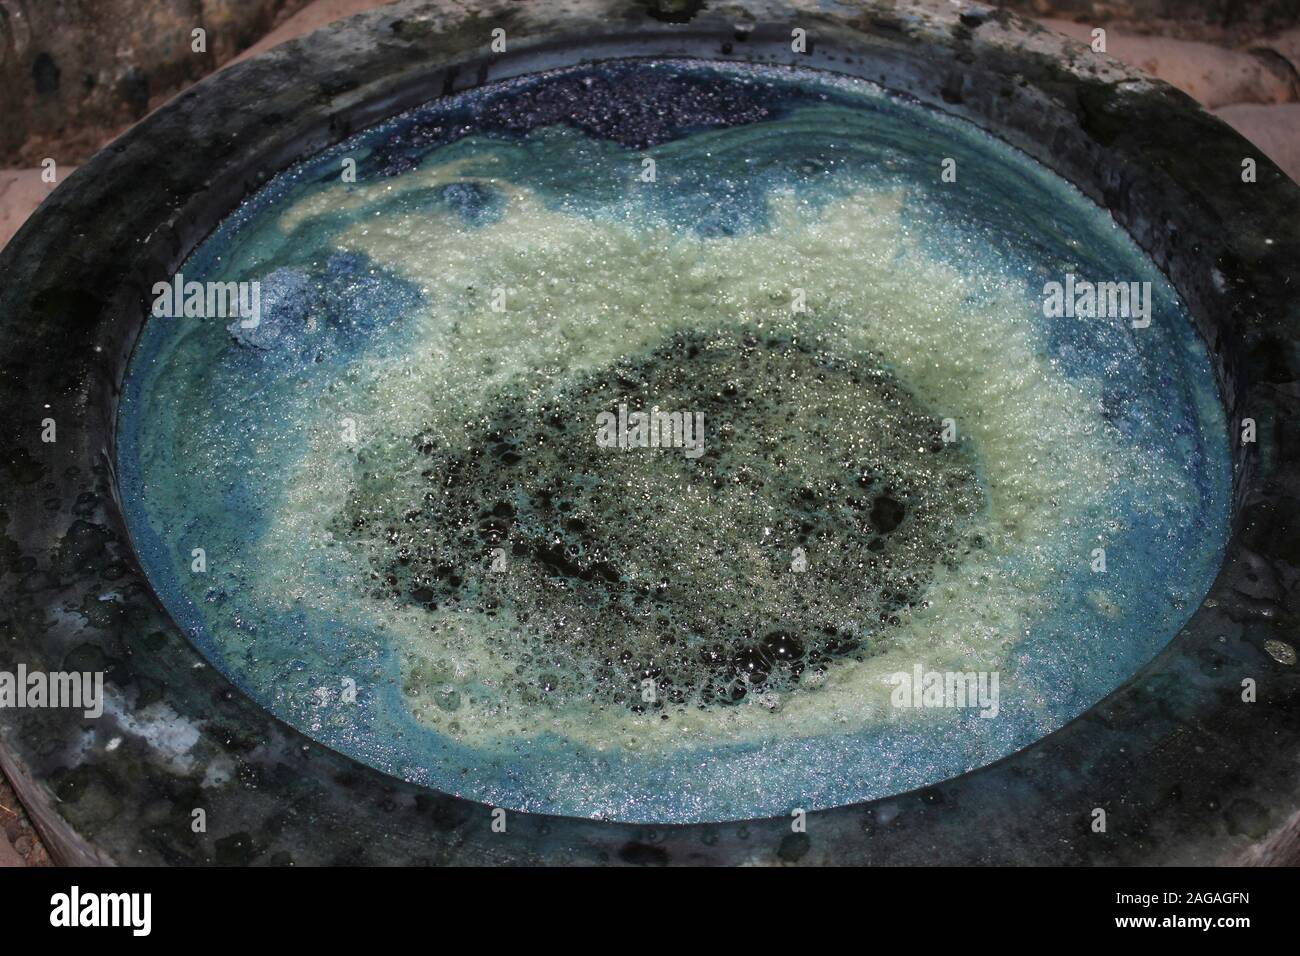 Pit for Indigo Dyeing Cloth and Yarn, Great Rann Of Kutch, Gujarat, India Stock Photo